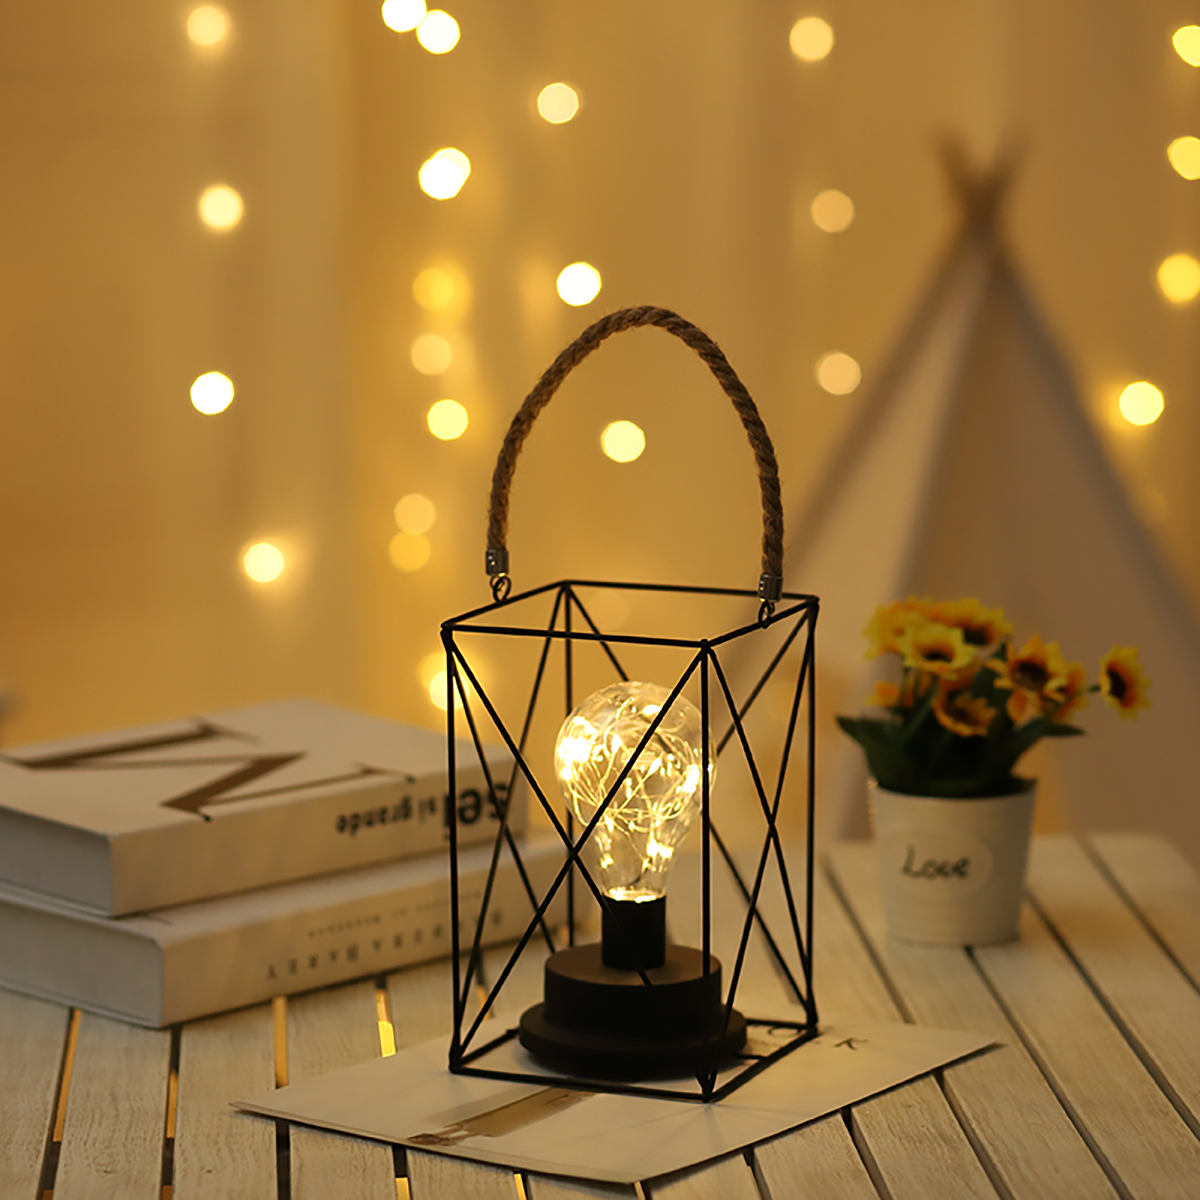 Retro-Cage-Light-Mini-Metal-Battery-Powered-LED-Bulb-Lamp-for-Living-Room-Bedroom-Kitchen-Wedding-Ch-1733946